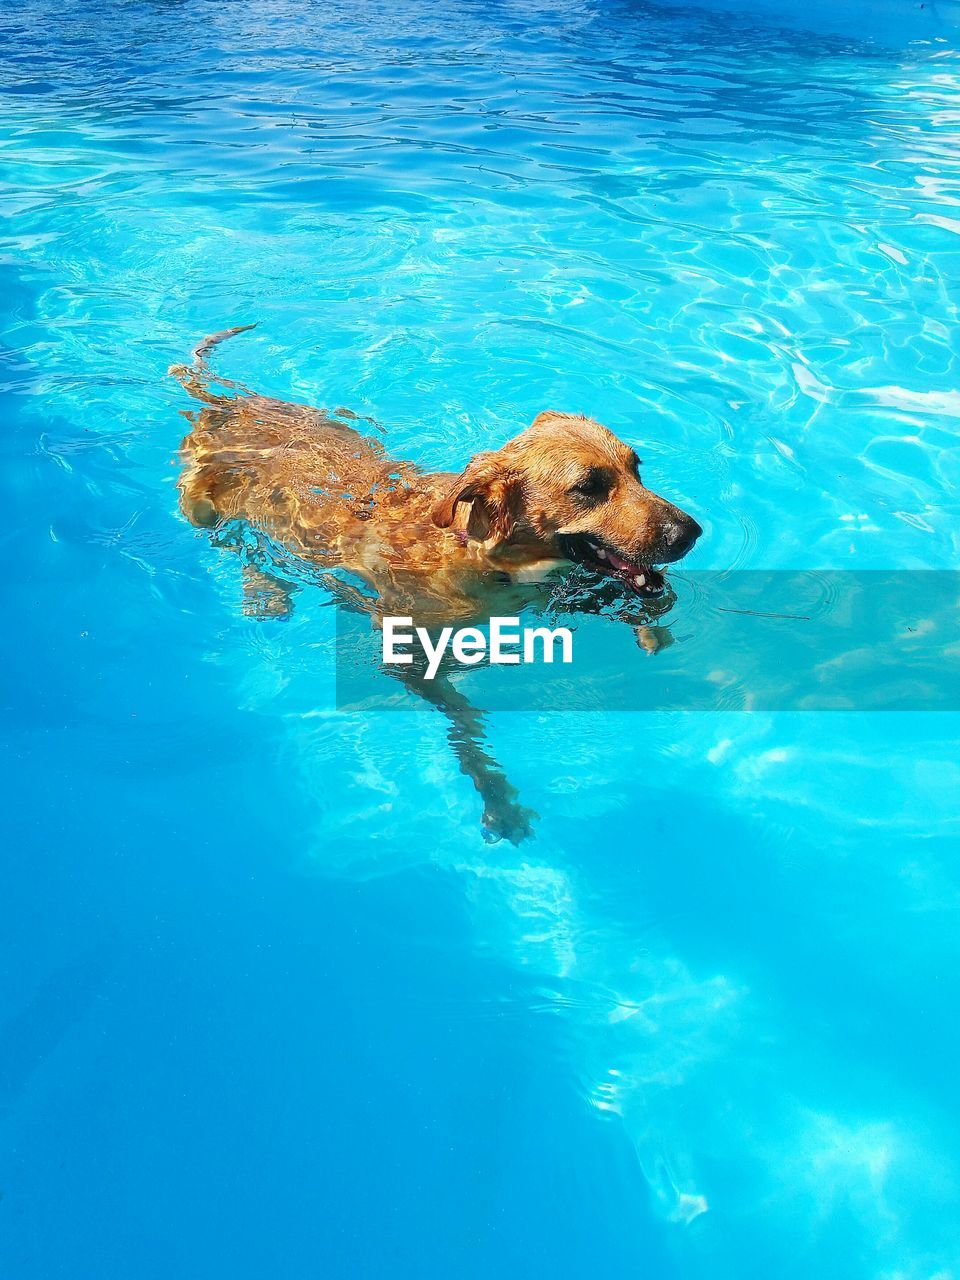 HIGH ANGLE VIEW OF DOG SWIMMING IN POOL AT NIGHT